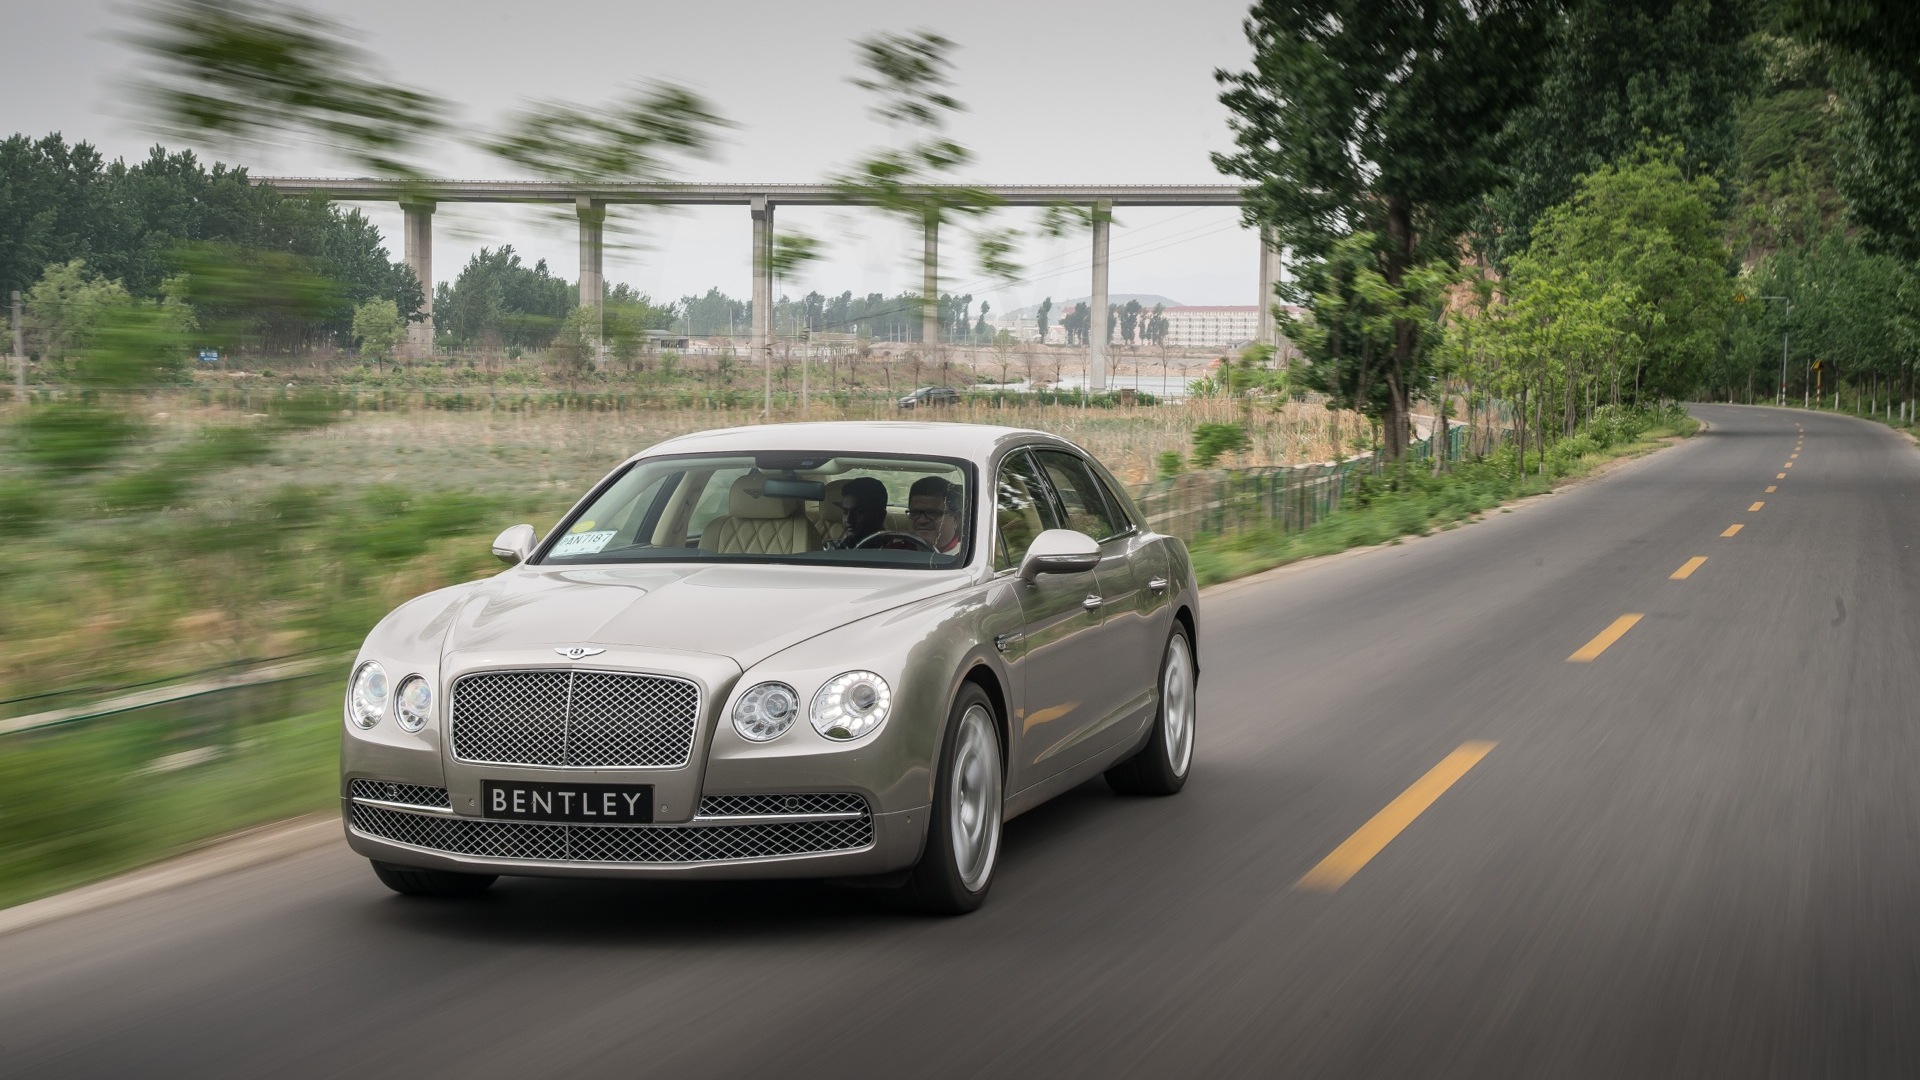 Bentley-Flying-Spur-2014-STD Compare